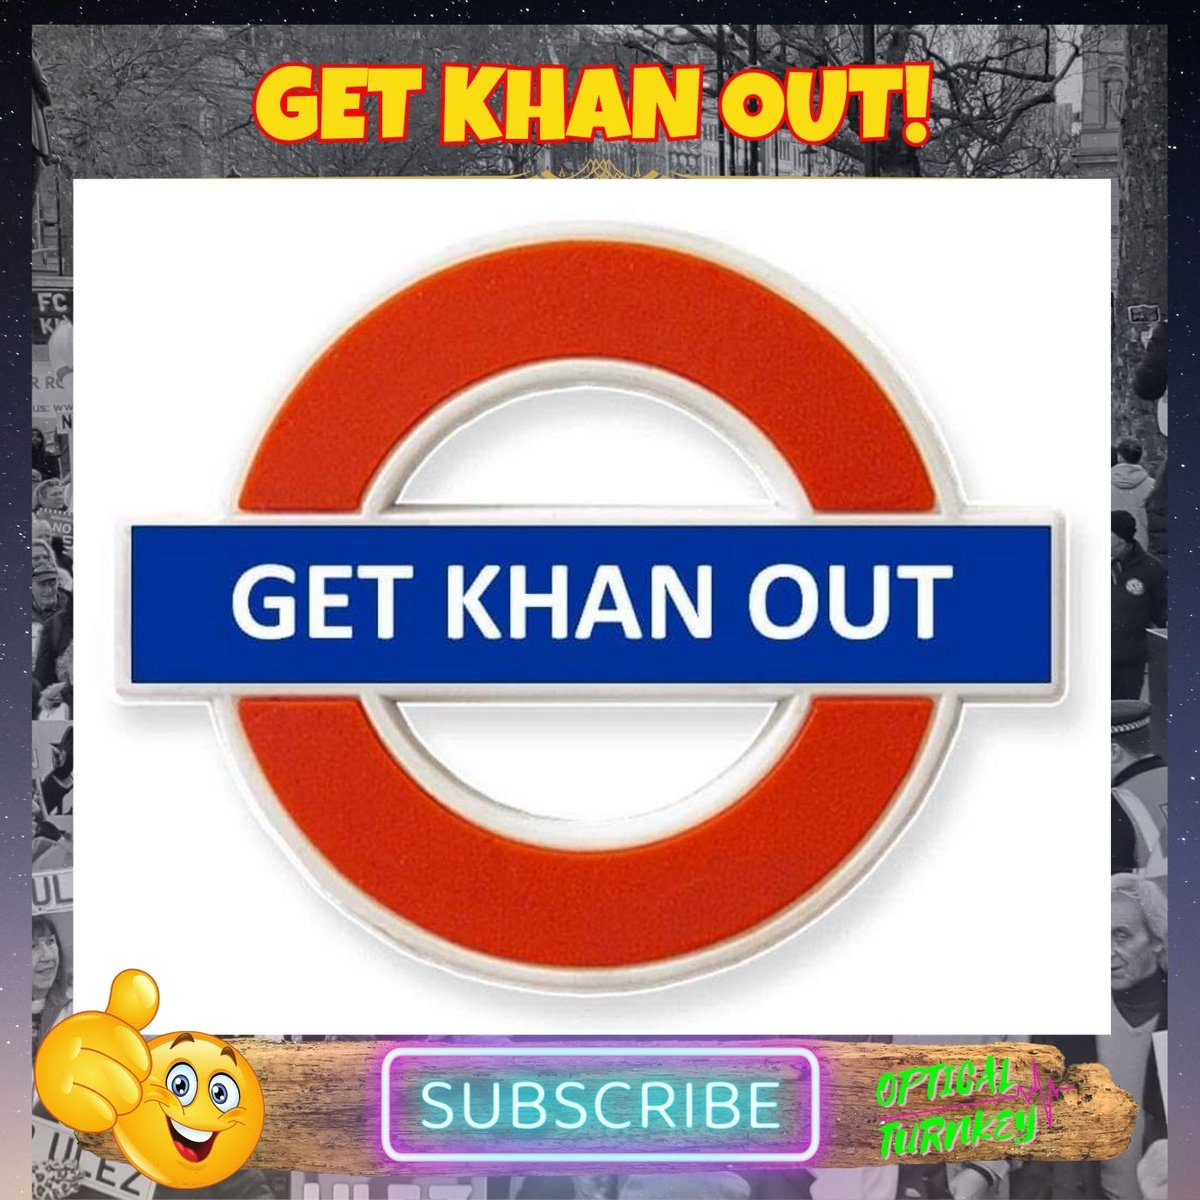 GET KHAN OUT on MAY 2nd 2024!
VOTE SUSAN HALL! Please RT!
#getkhanout #notoulez #wewillnotcomply
🎉👍💪🚫💪👍🚫💪👍🚫🎉